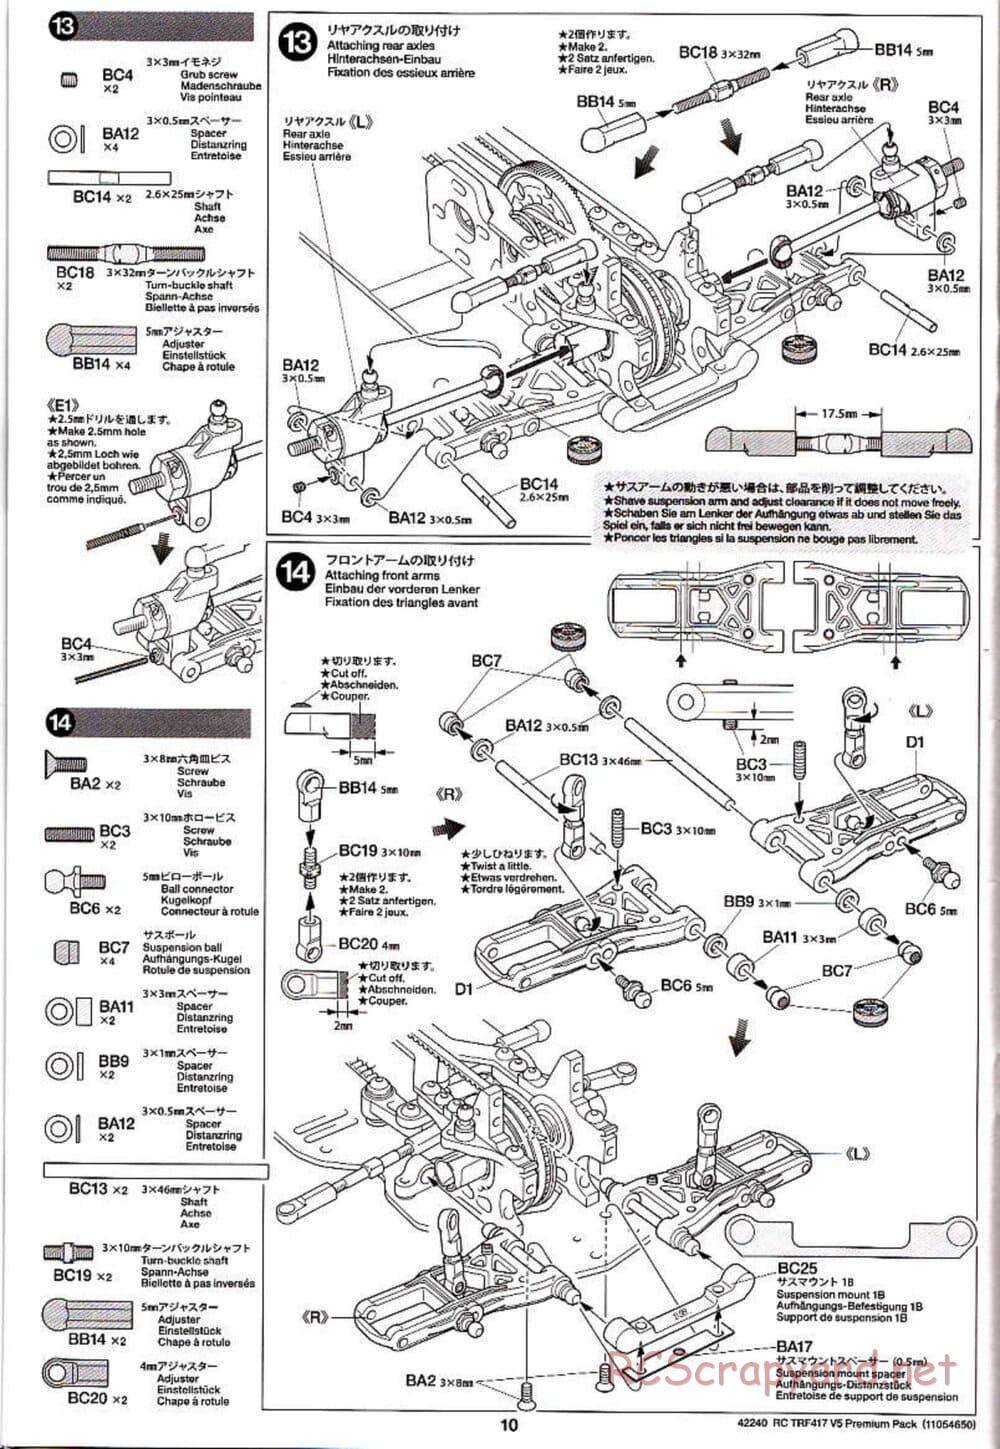 Tamiya - TRF417 V5 Premium Package Chassis - Manual - Page 10